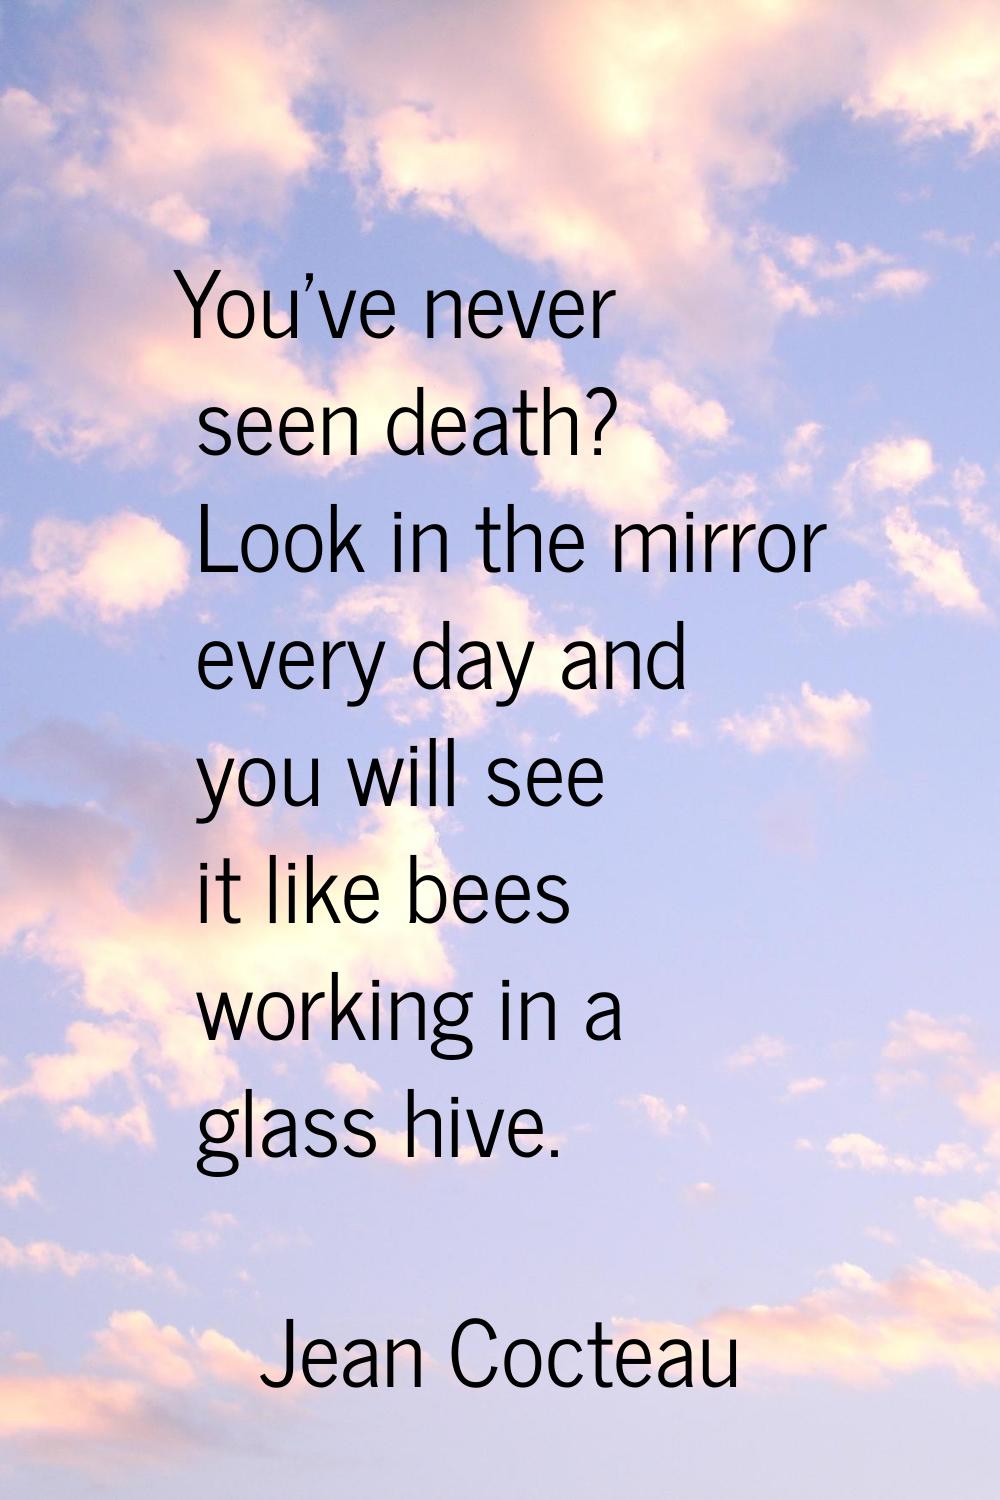 You've never seen death? Look in the mirror every day and you will see it like bees working in a gl